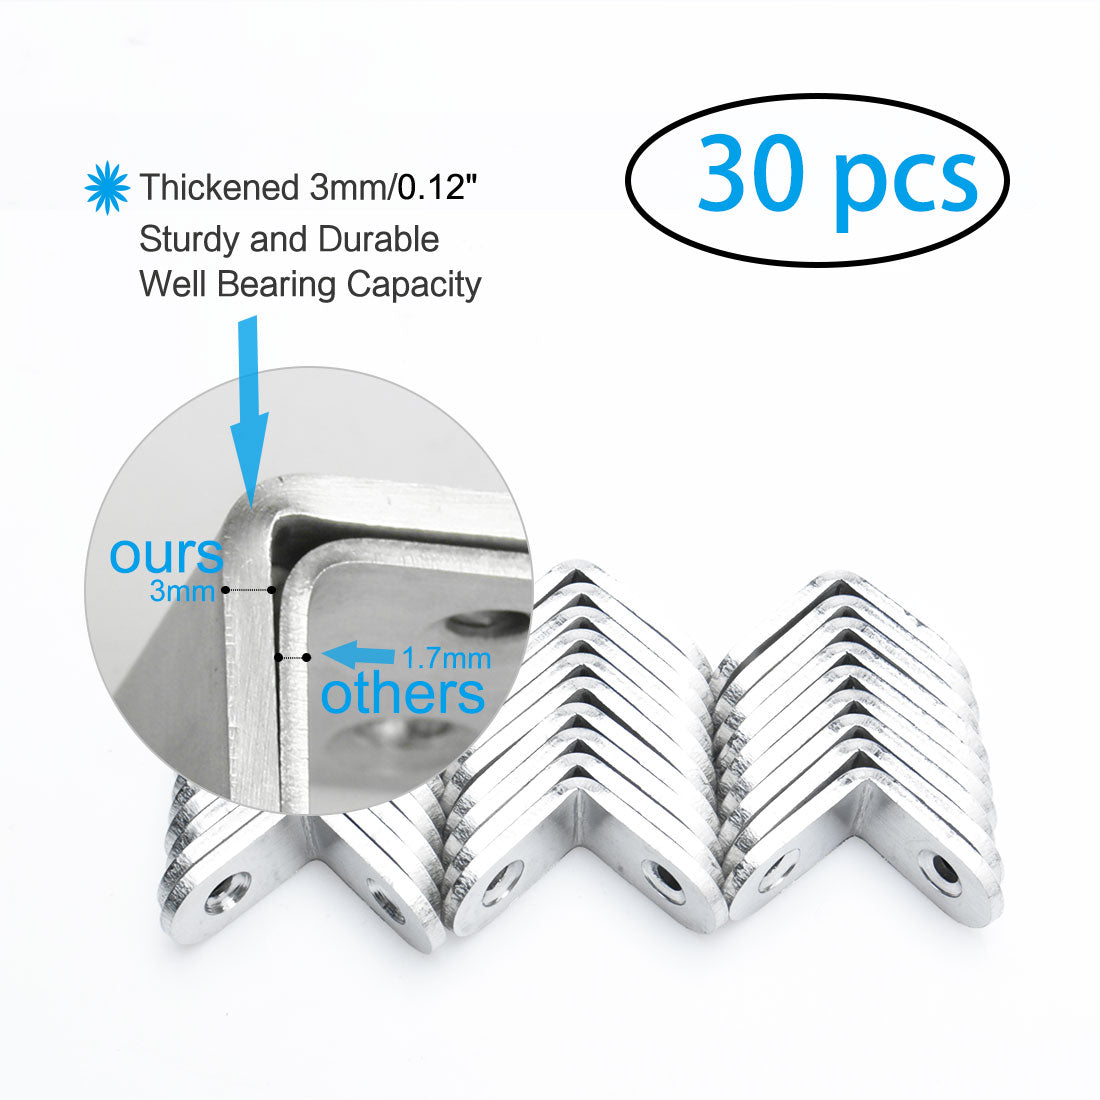 uxcell Uxcell Angle Bracket Stainless Steel Brace Fastener Support w Screws 25 x 25mm, 30pcs